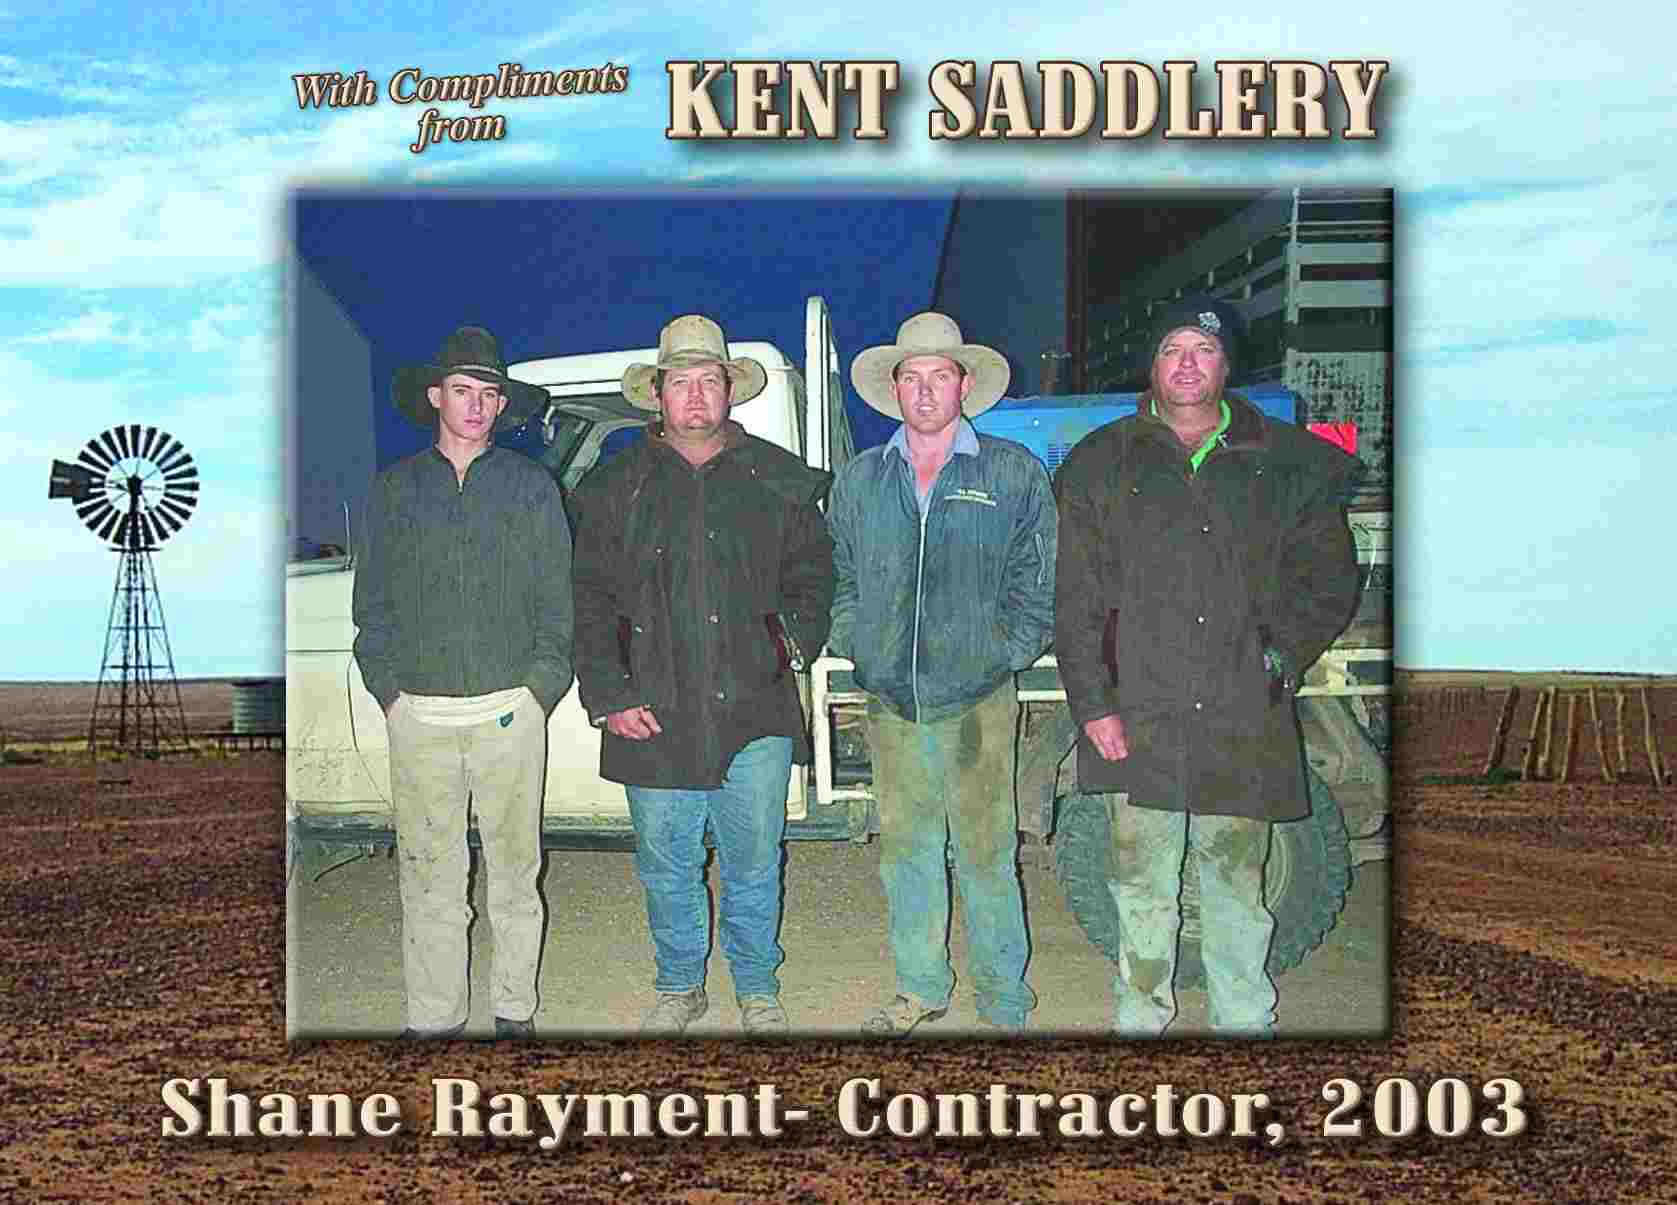 Drovers & Contractors - Shane Rayment Contractor 2